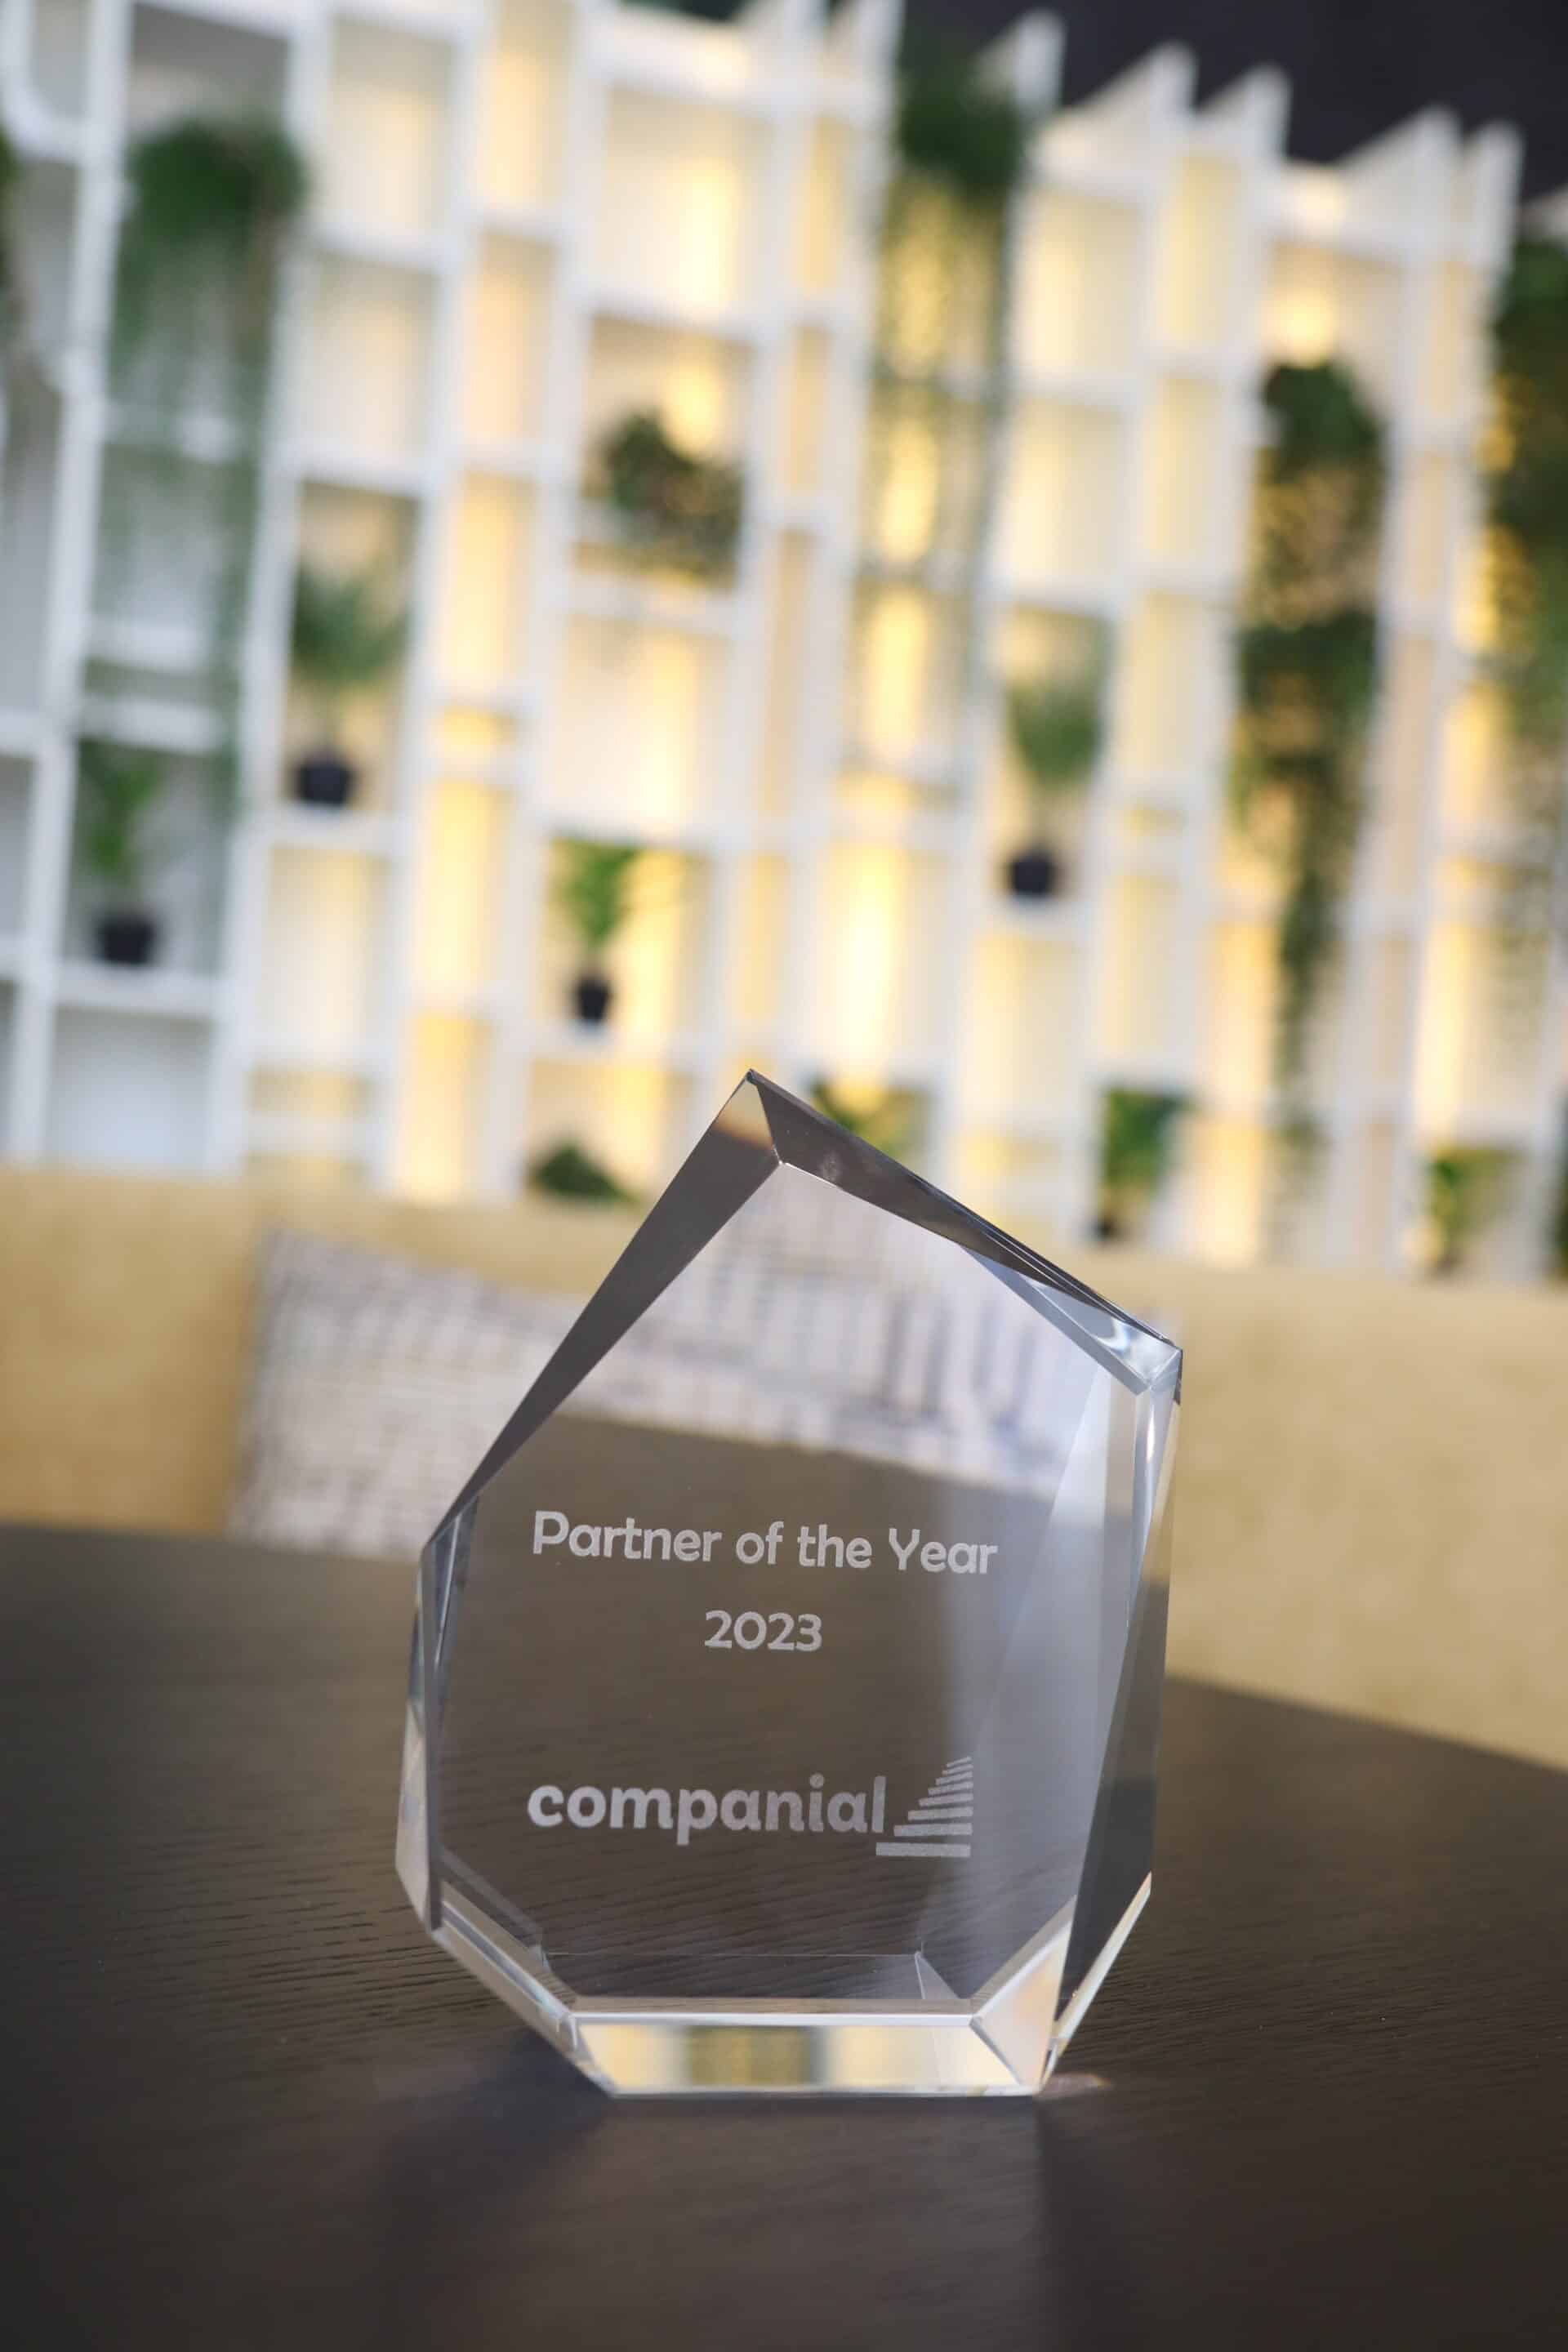 GMI group | Companial Partner of the Year 2023